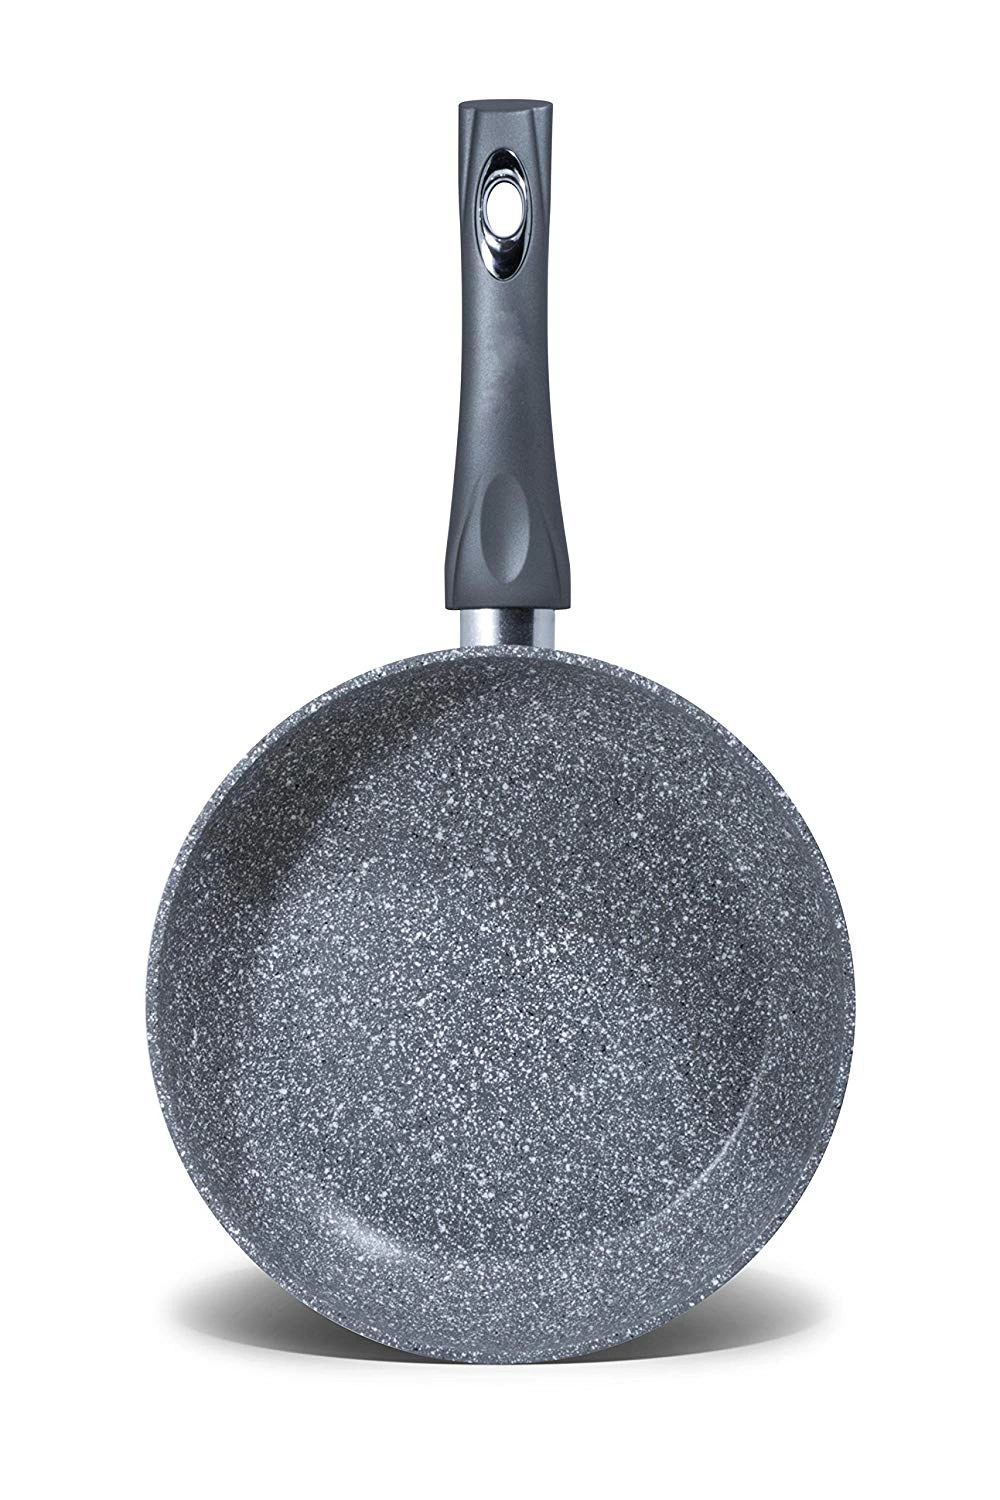 Nonstick Grey Marble Stone Fry Pan Granite Frying Pan with Induction Bottom Long TPR Soft Handle Skillet Ceramic Coating Inside